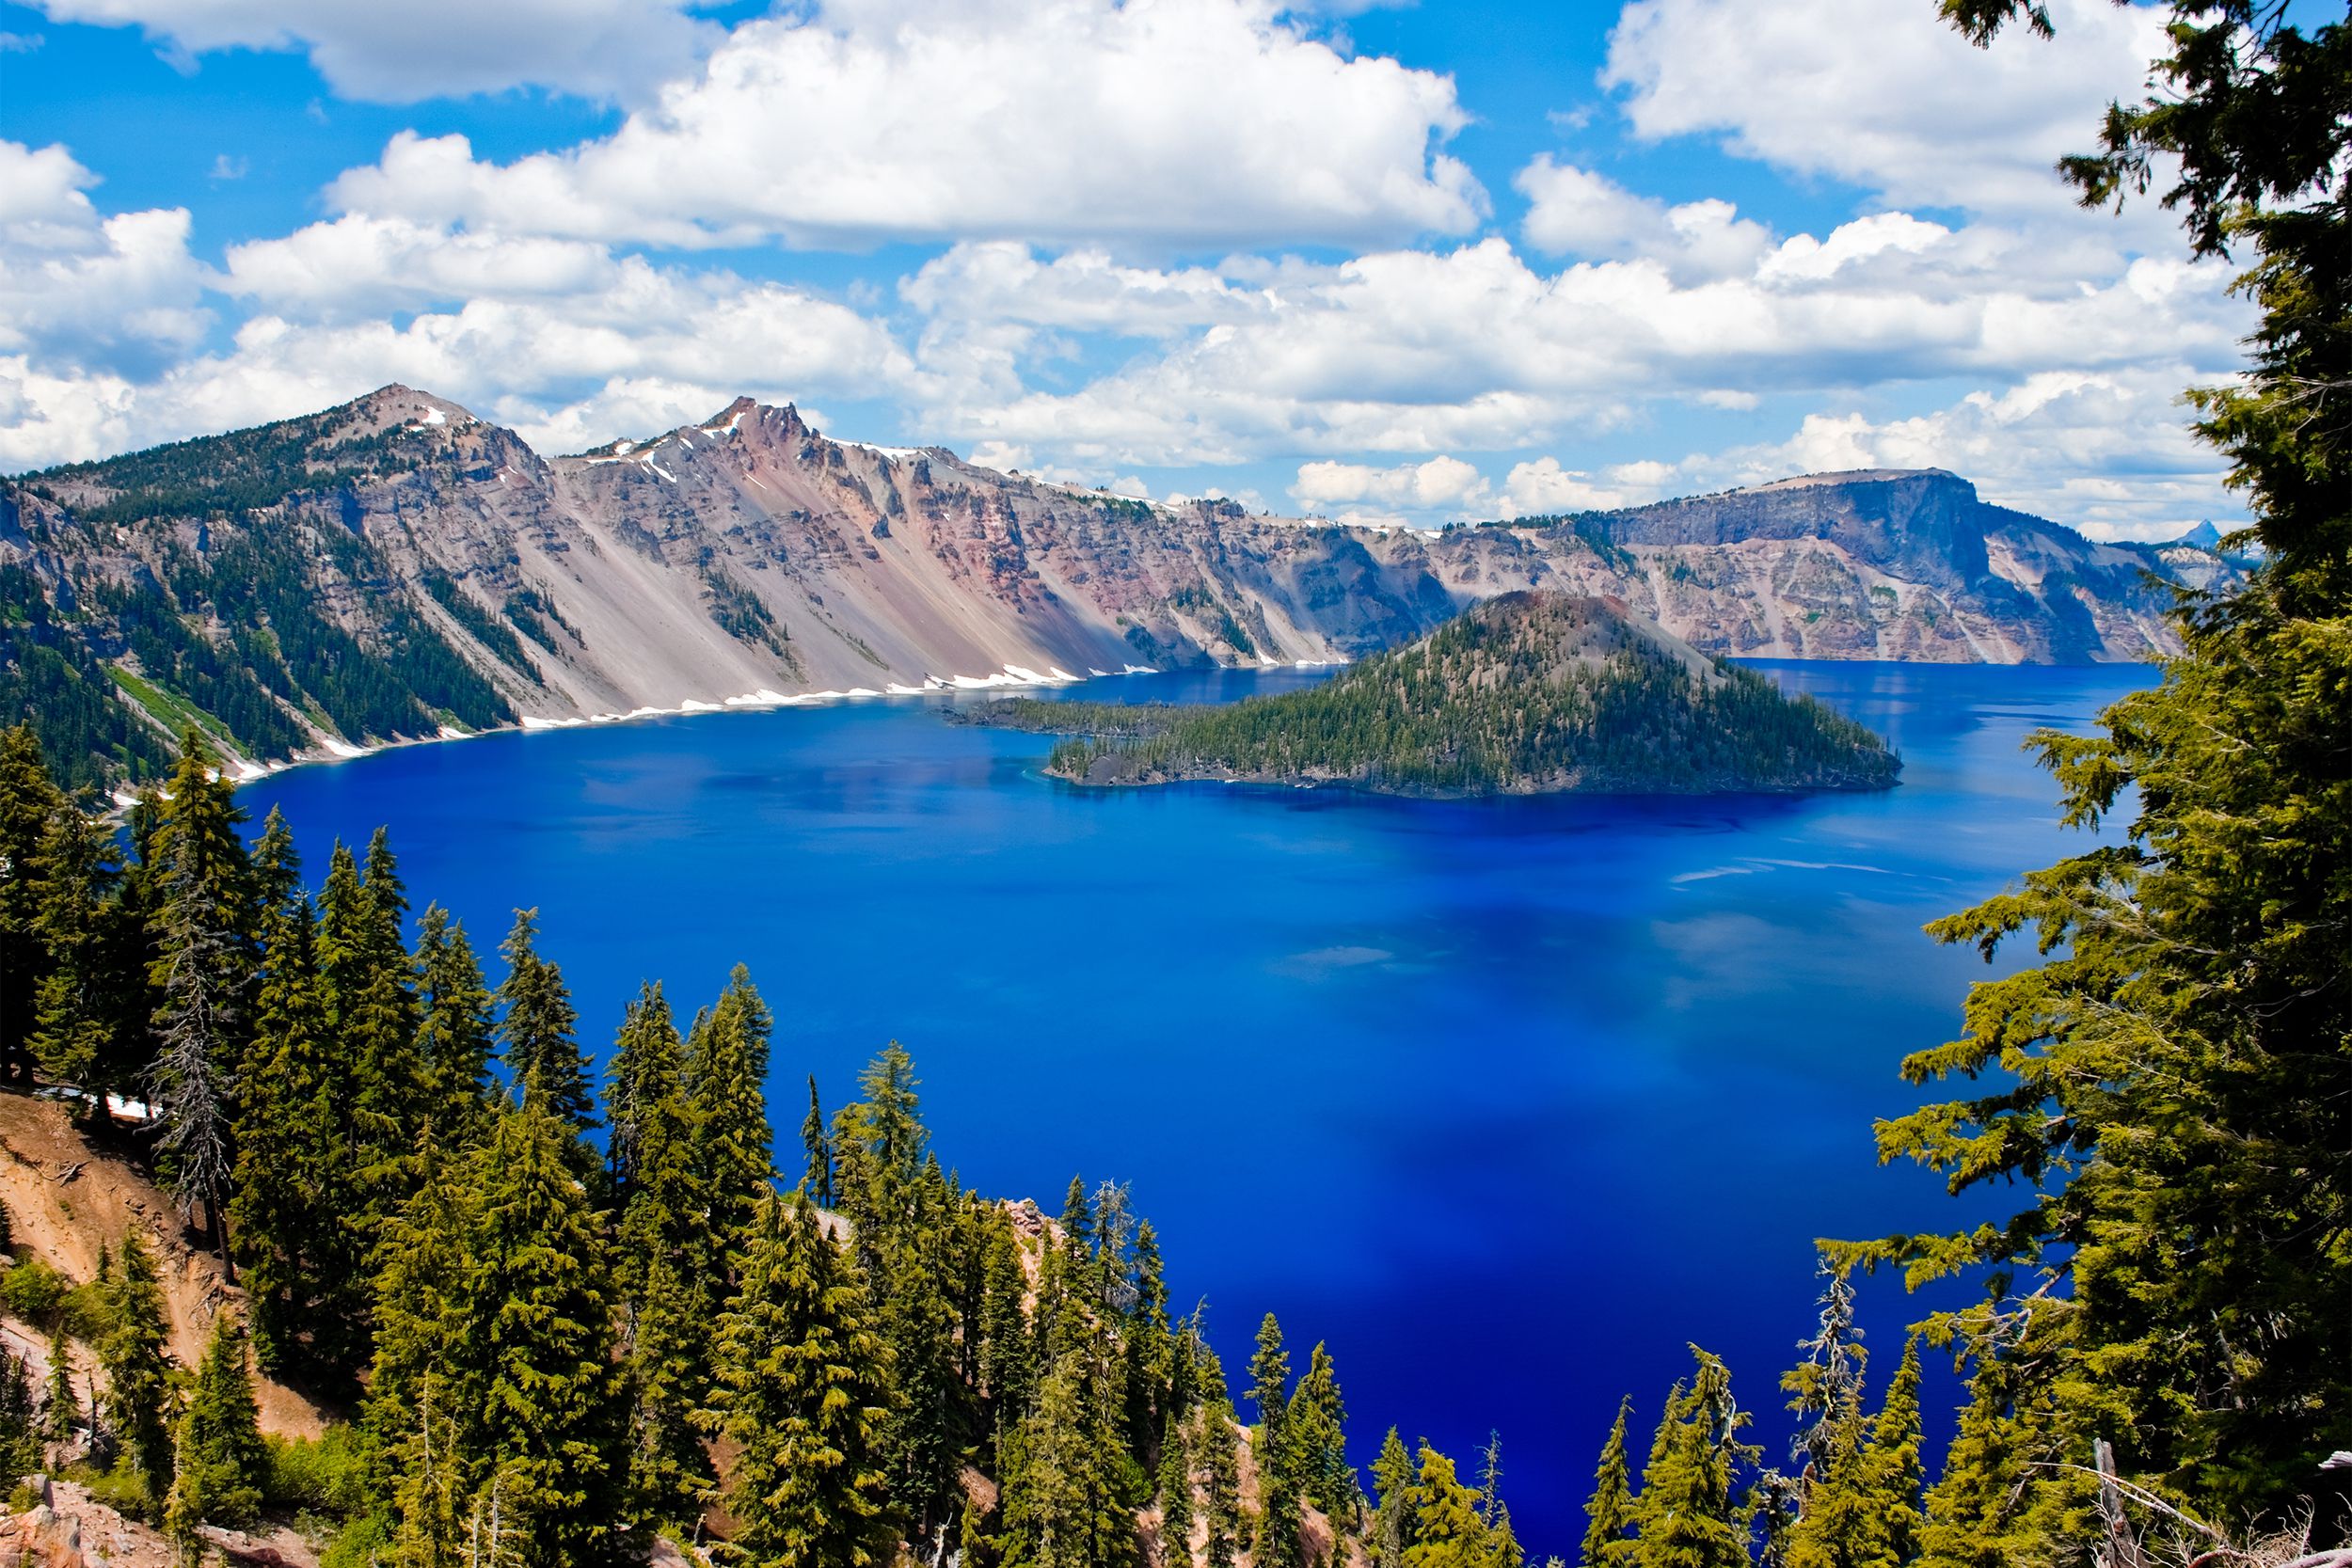 <p>Created some 7,700 years ago through an eruption that caused the collapse of the volcano Mount Mazama, <a href="https://www.nps.gov/crla/index.htm">Crater Lake National Park</a> is home to the deepest lake in the country and one of the most unspoiled in the world. Its stunning jewel-blue waters are simply unforgettable. </p>